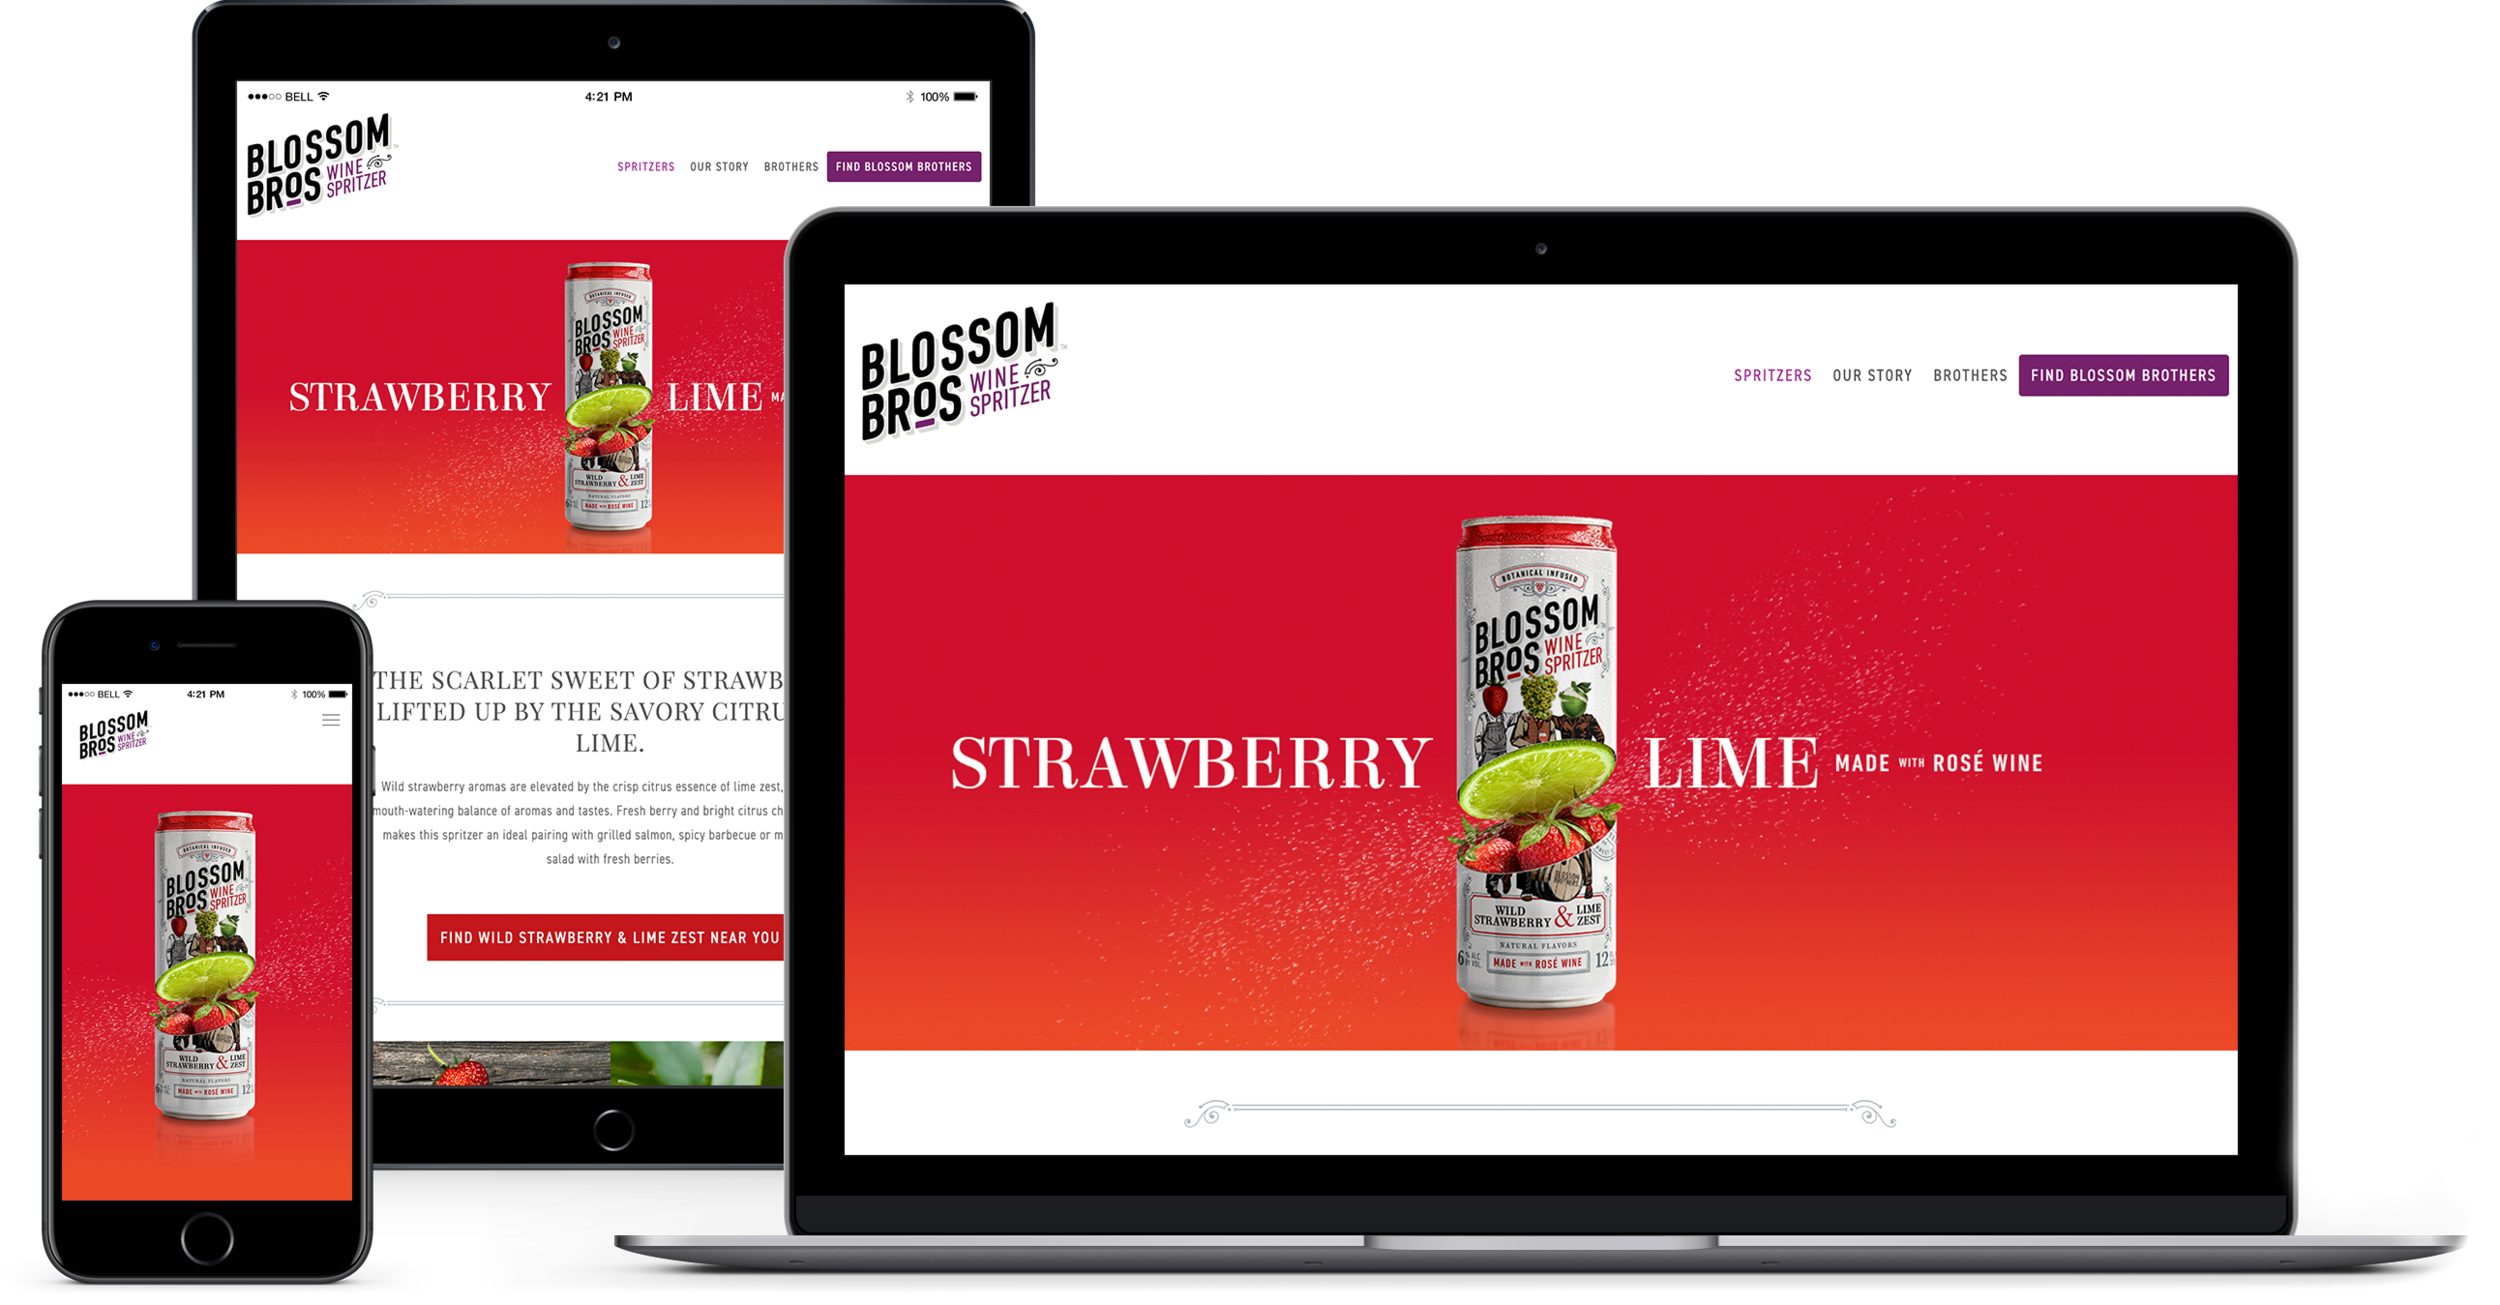 02 - Product Page - Strawberry Lime.png